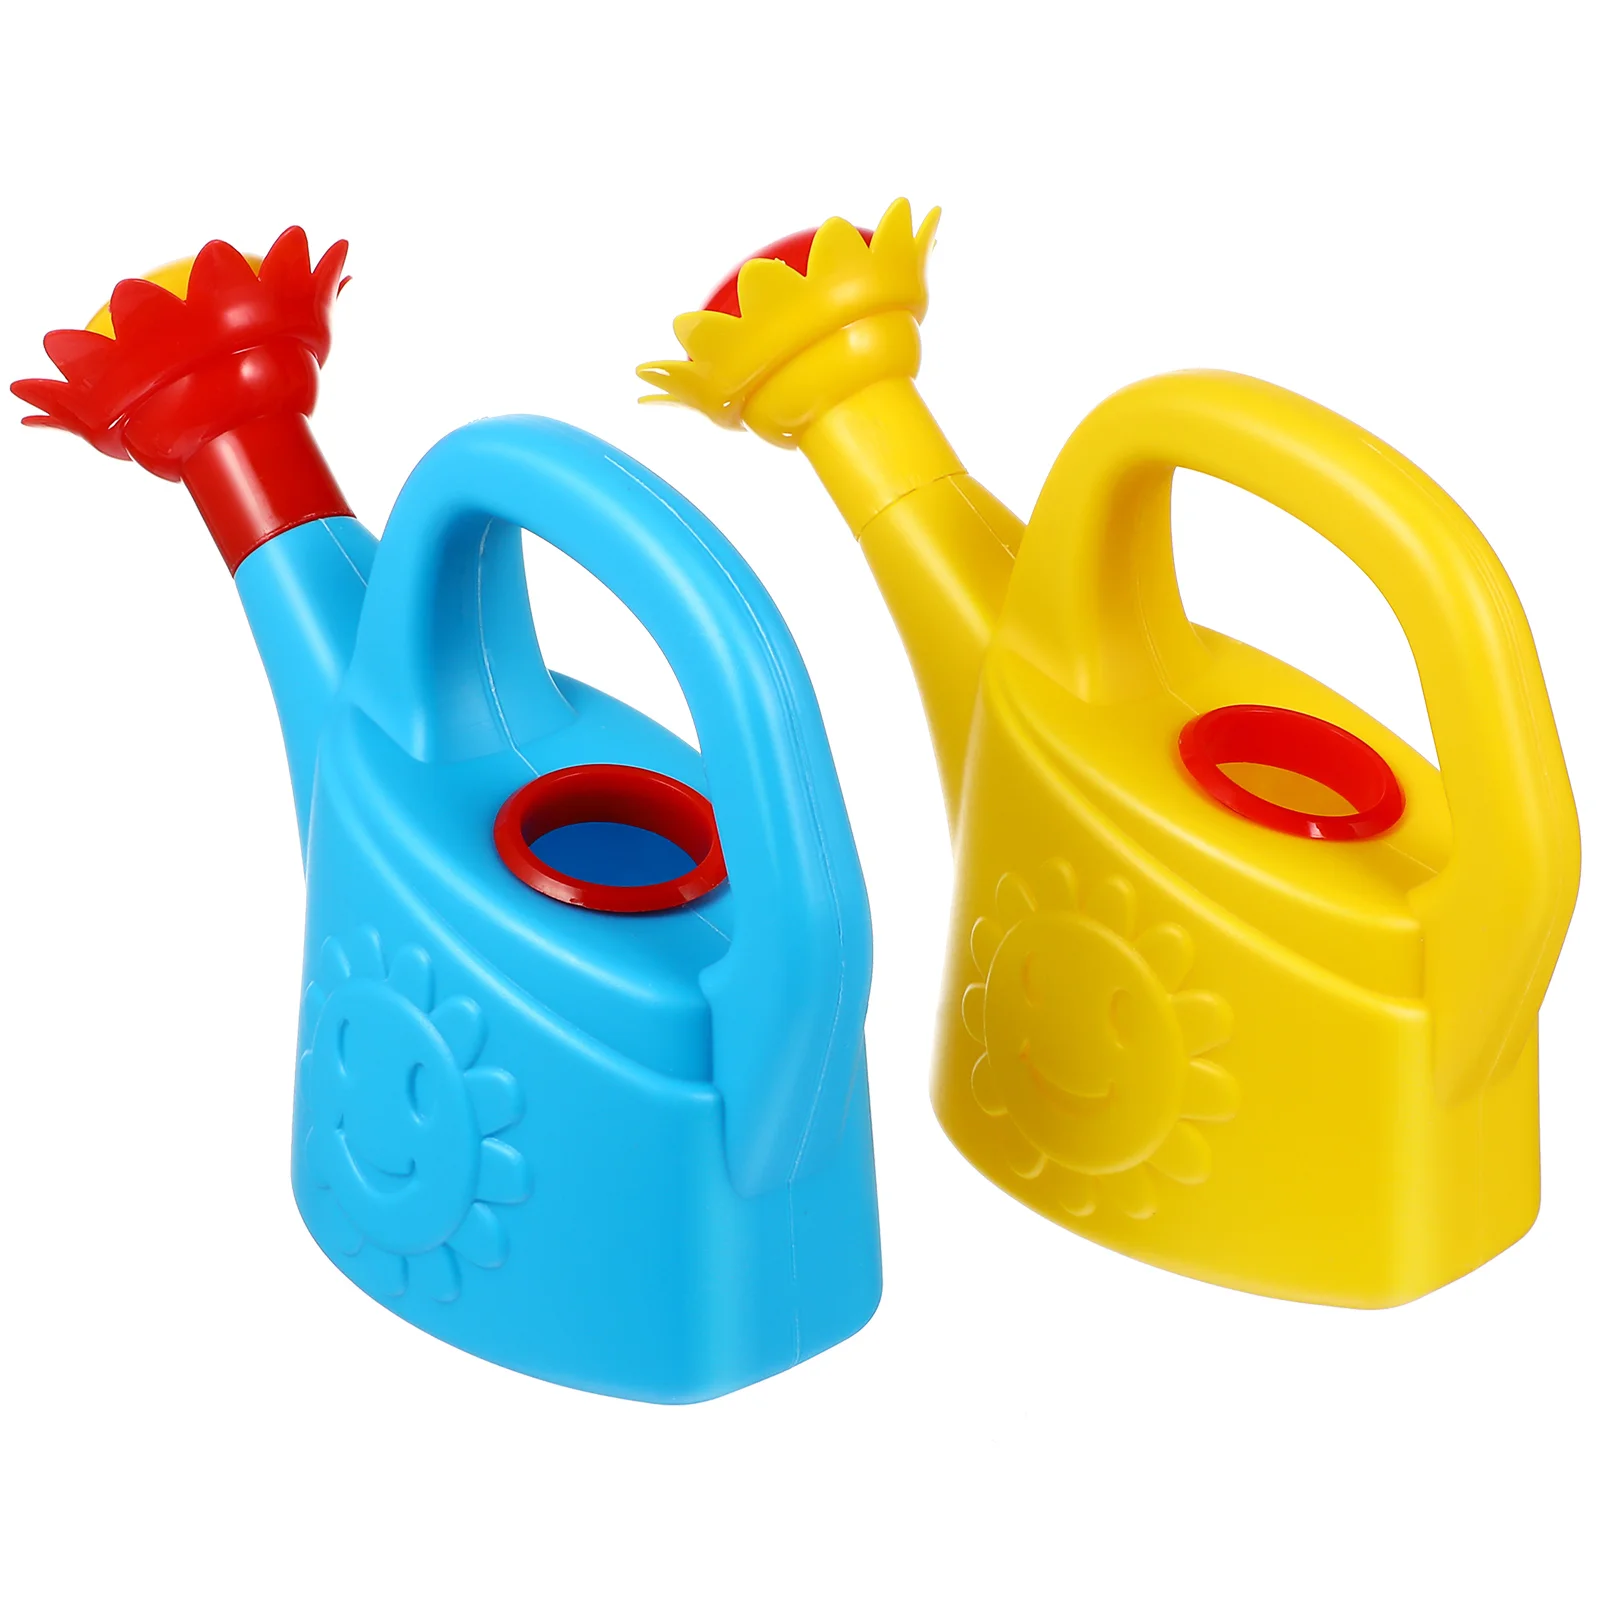 

watering can toys, watering can watering pot chicken bath for cartoon early educational for home garden outdoor activities